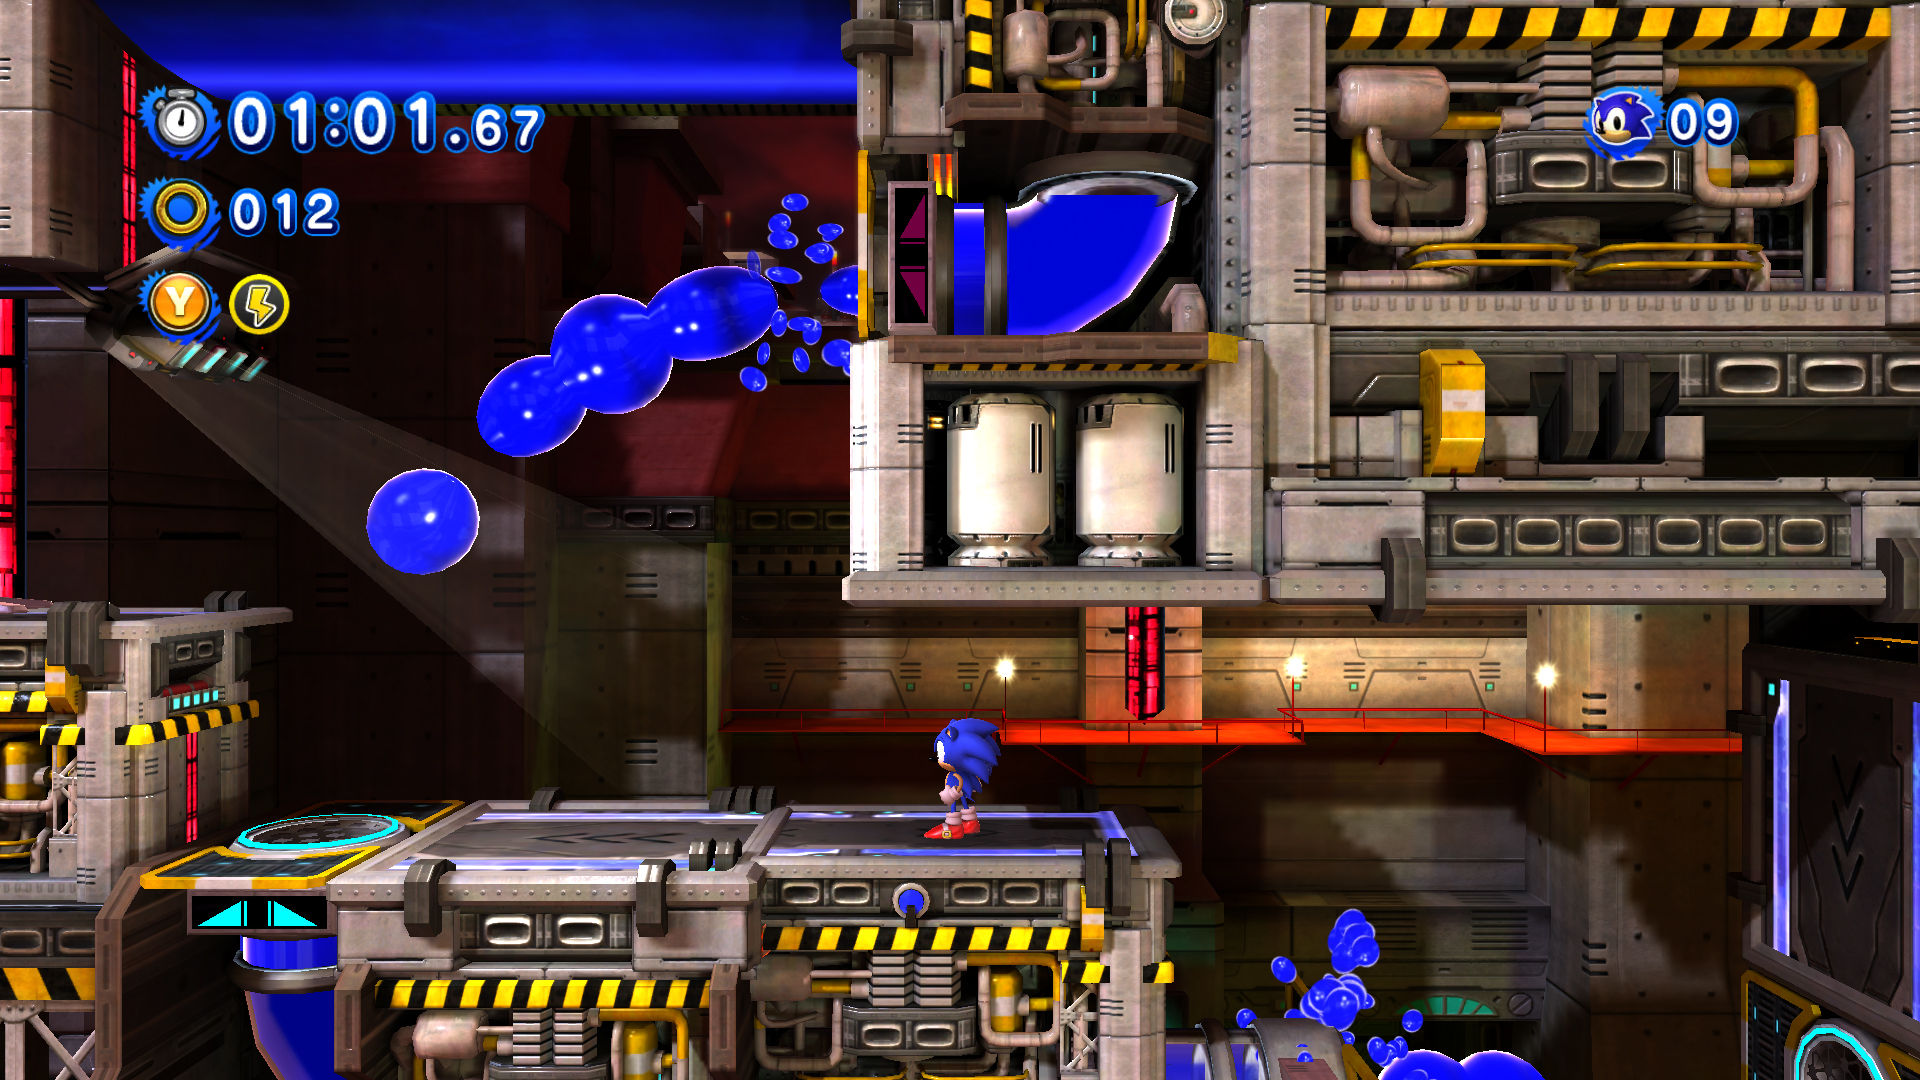 sonic generations 2d play online